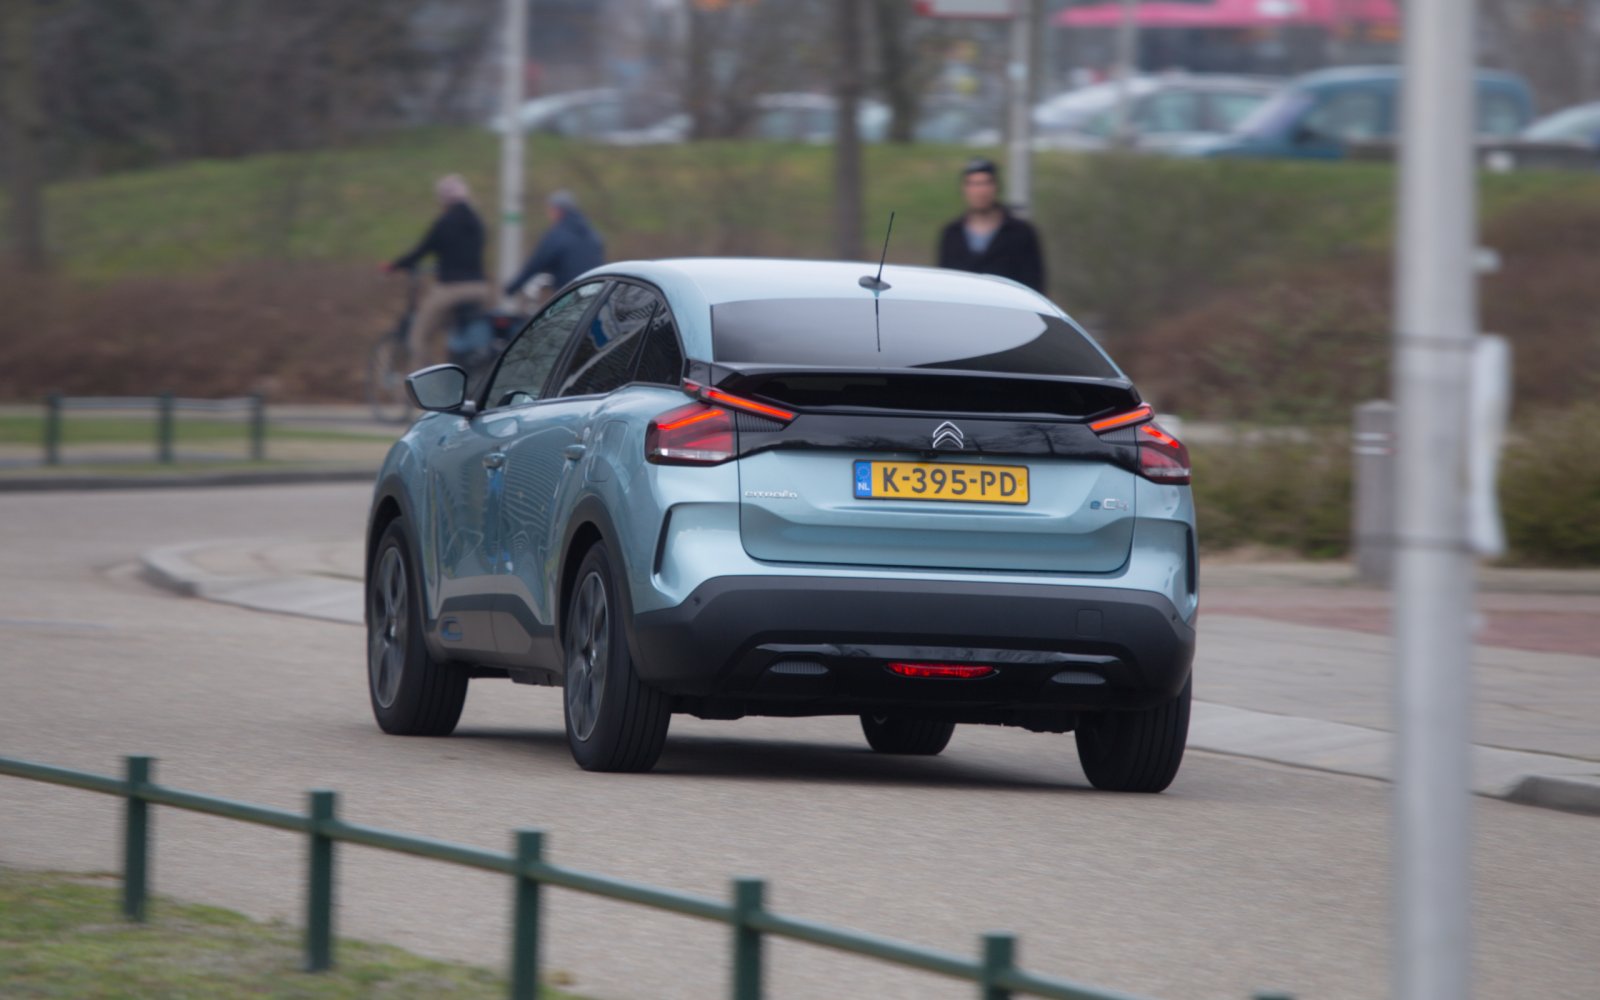 Top 20 - These electric cars came furthest in our range-of-action test